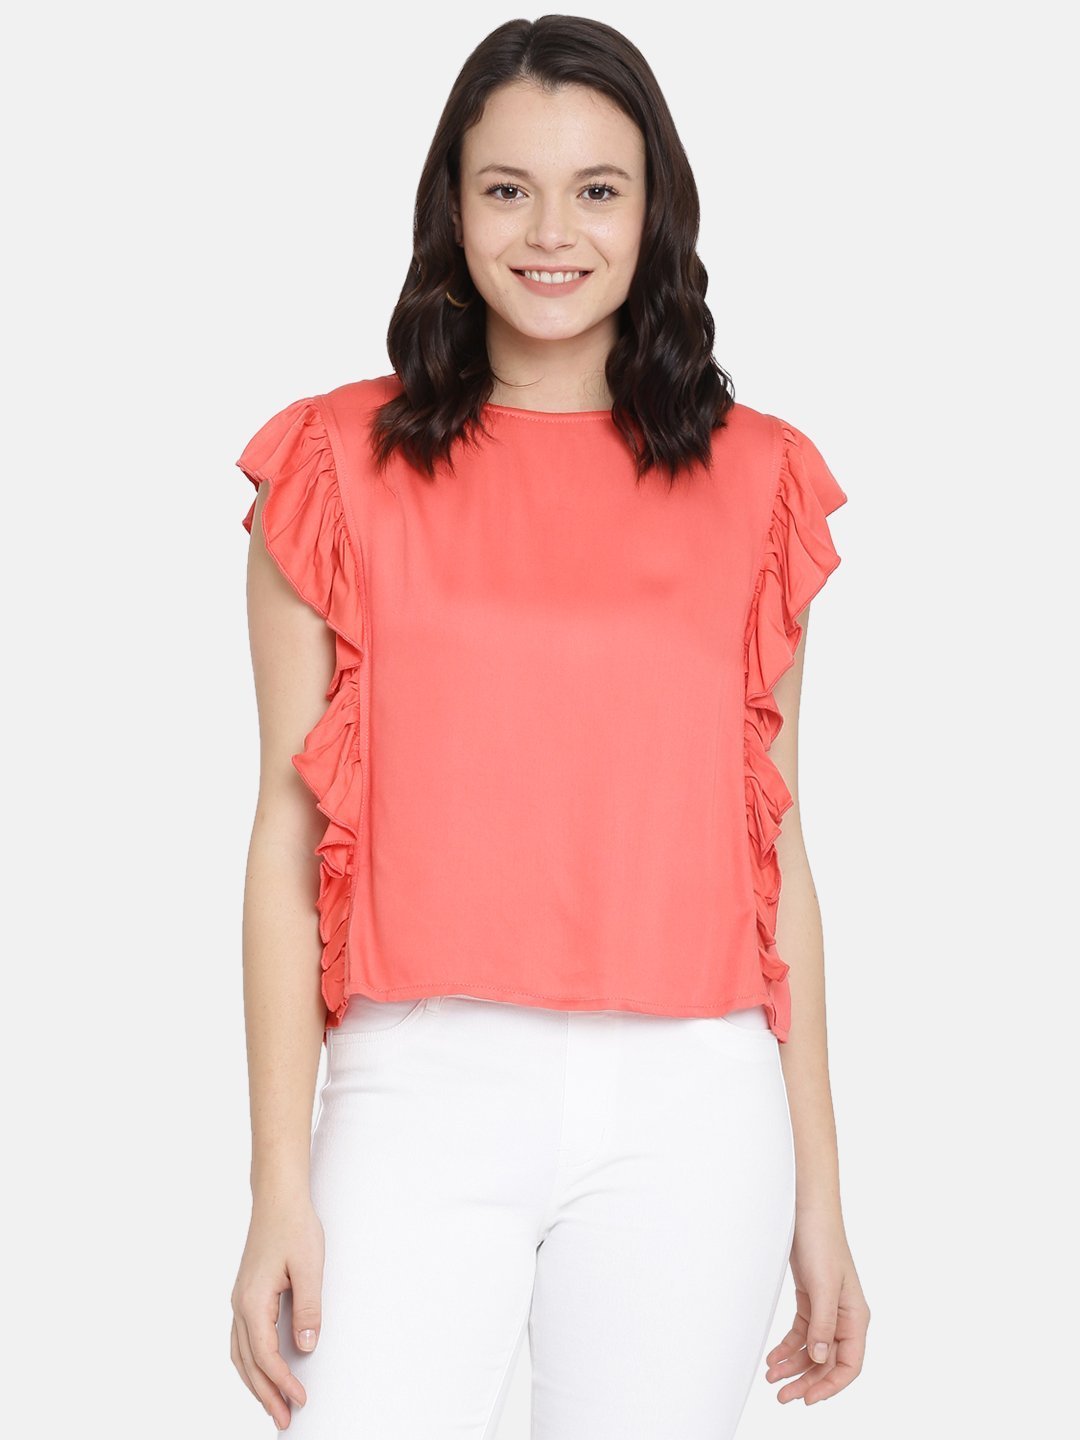 IS.U Coral Sleeveless Frill Top